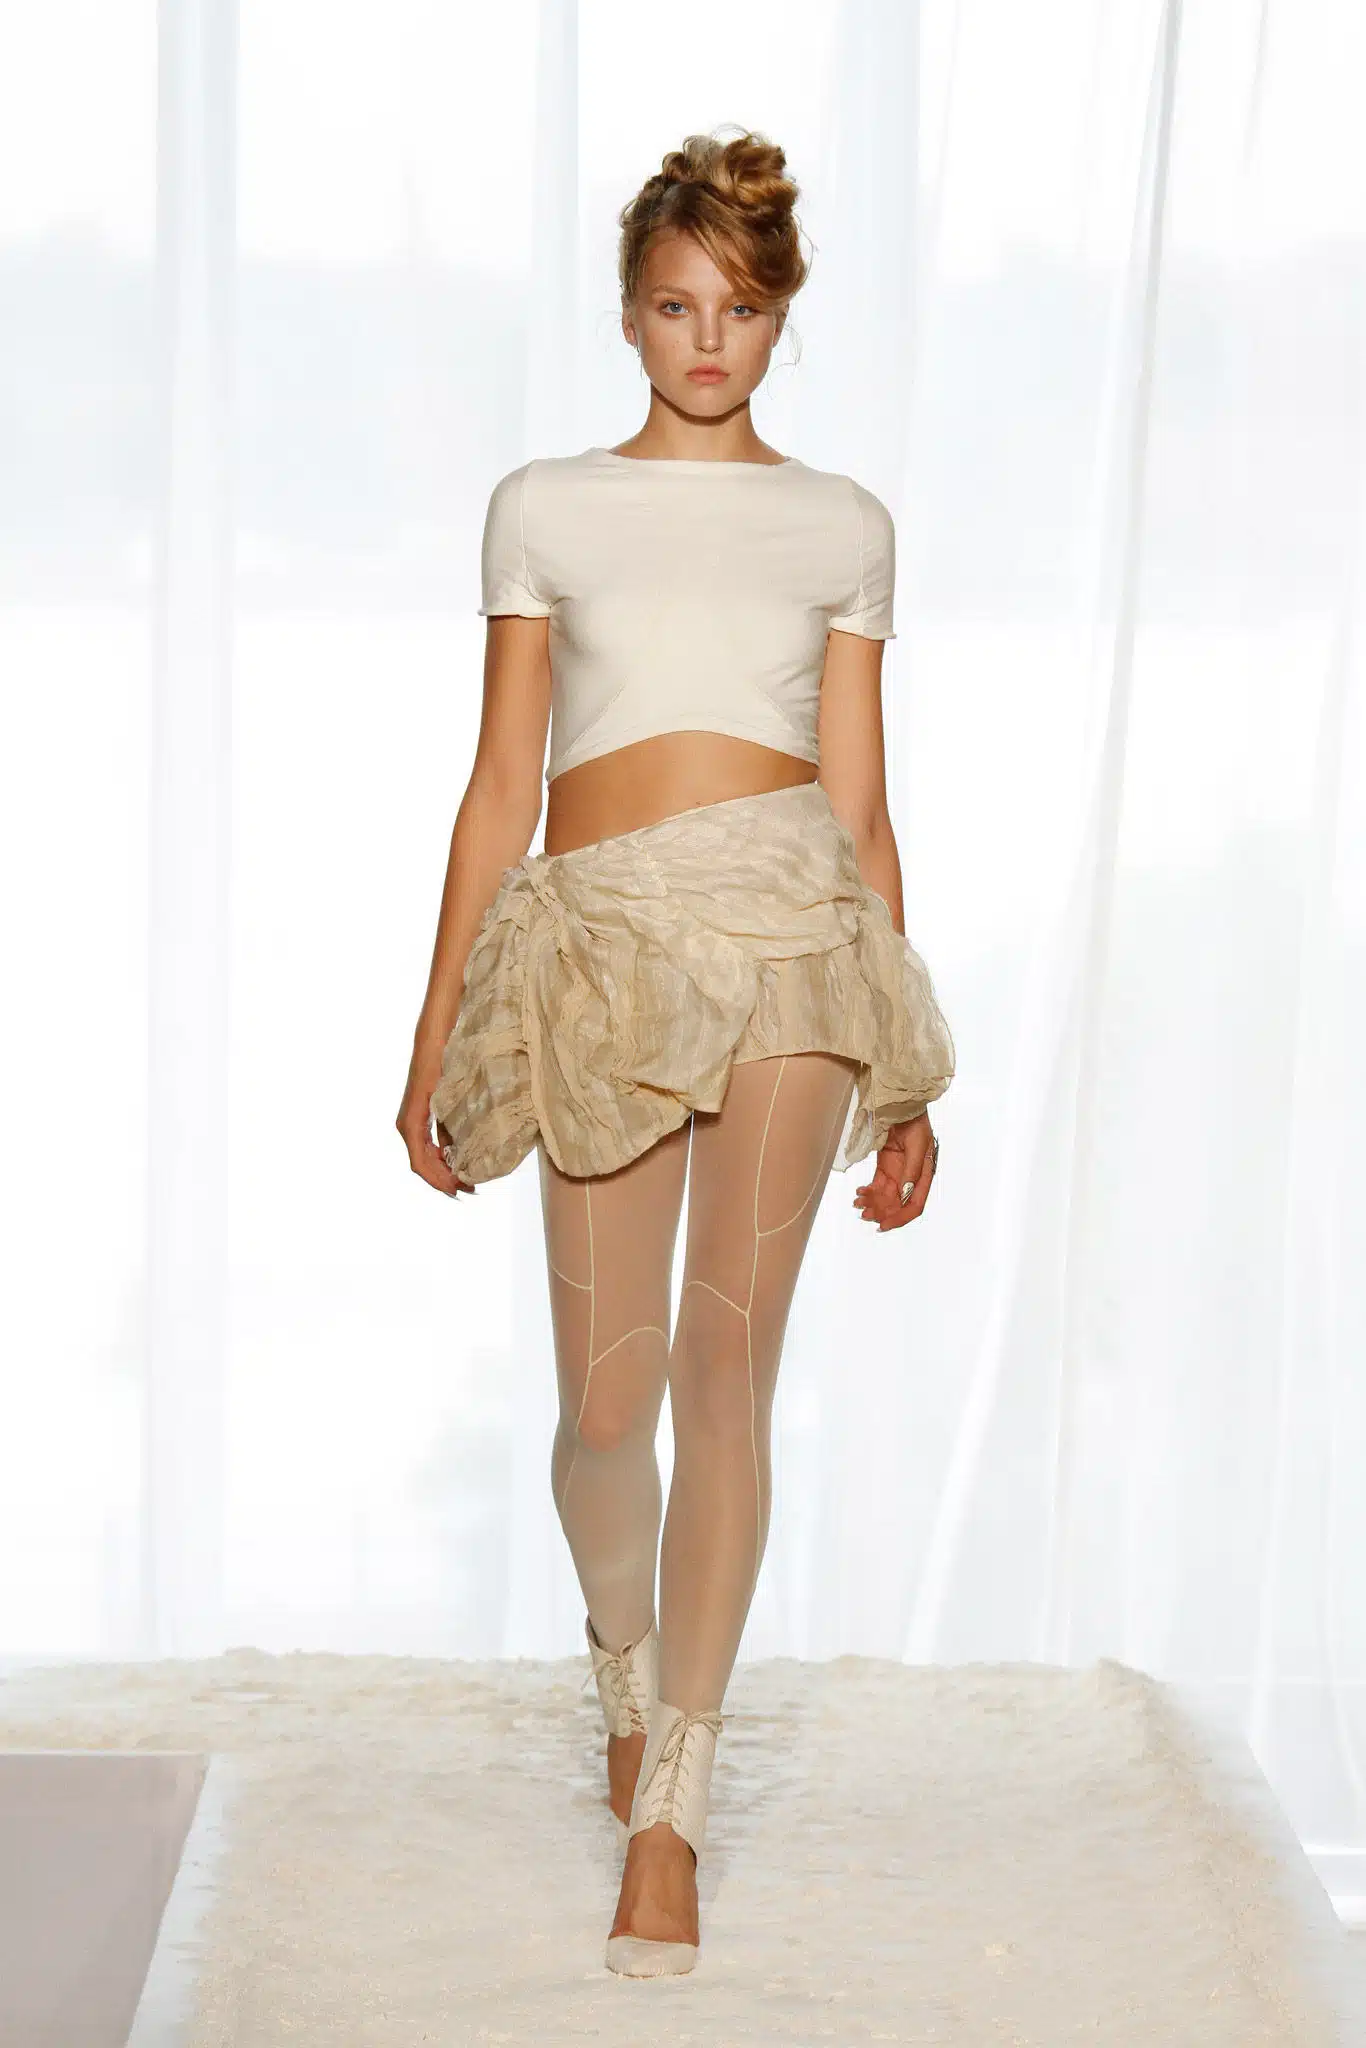 Image from SS13 SHOW Collection